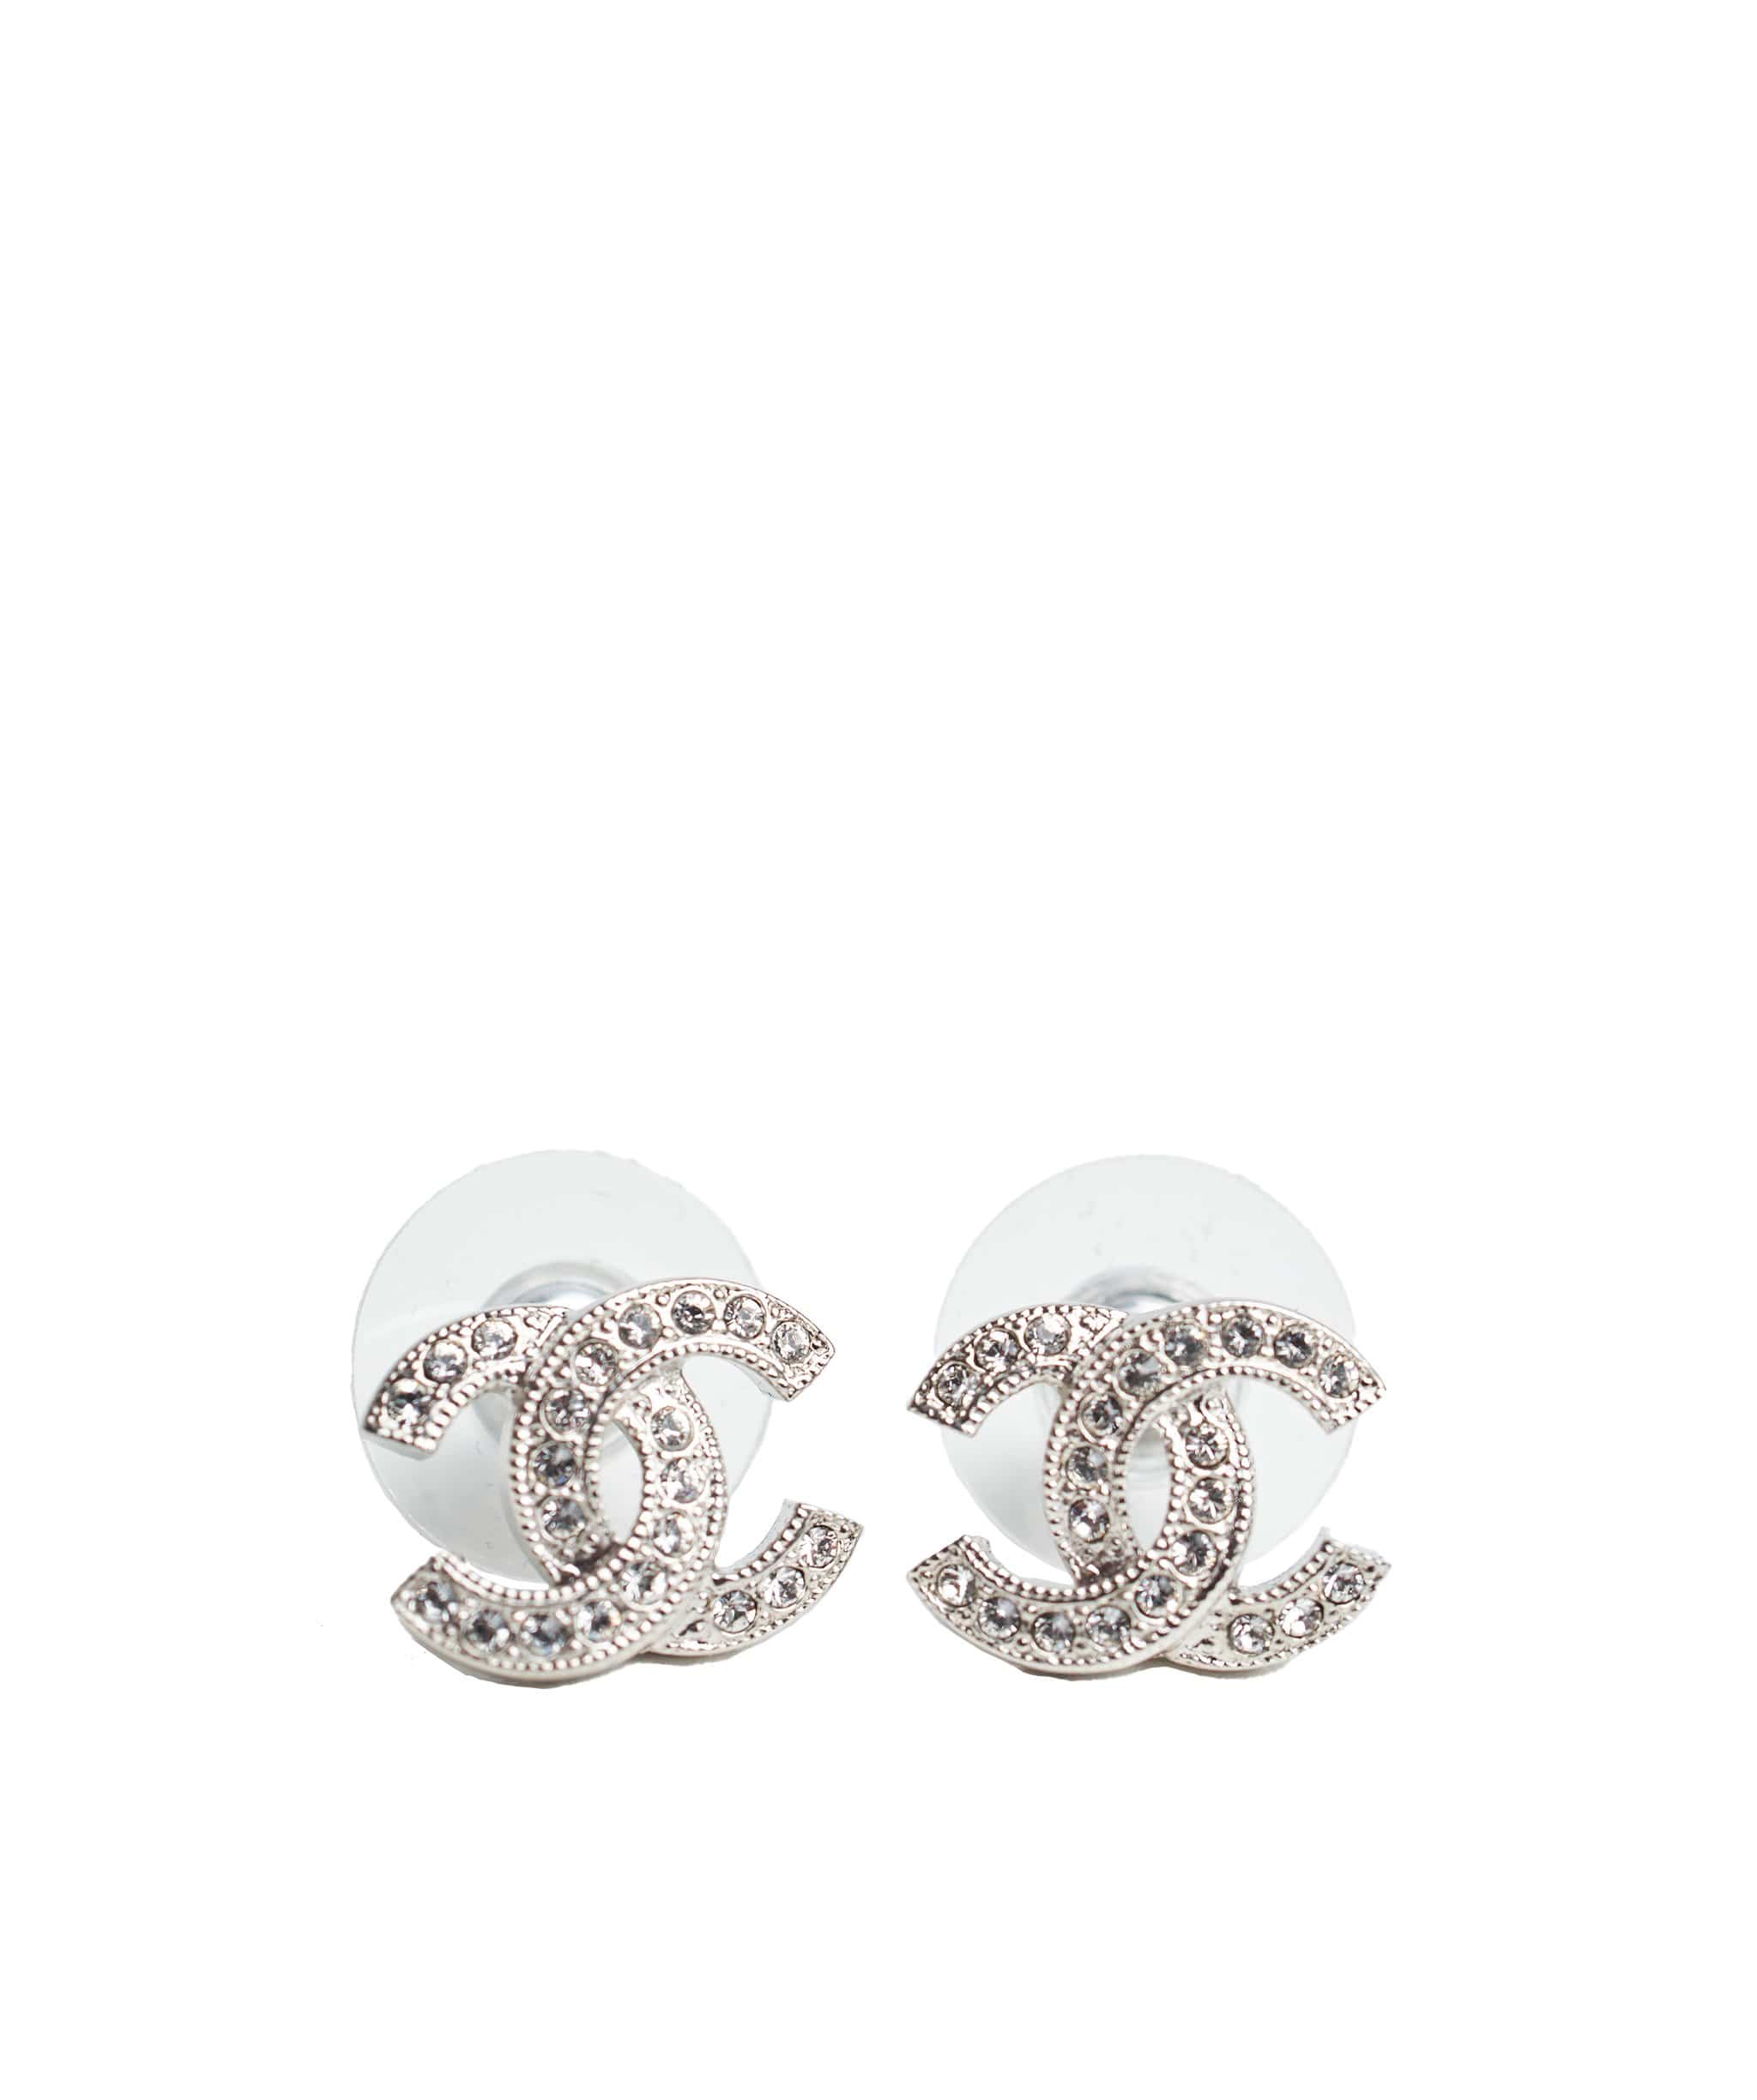 Chanel Chanel CC logo gold crystal earrings with gold trimming